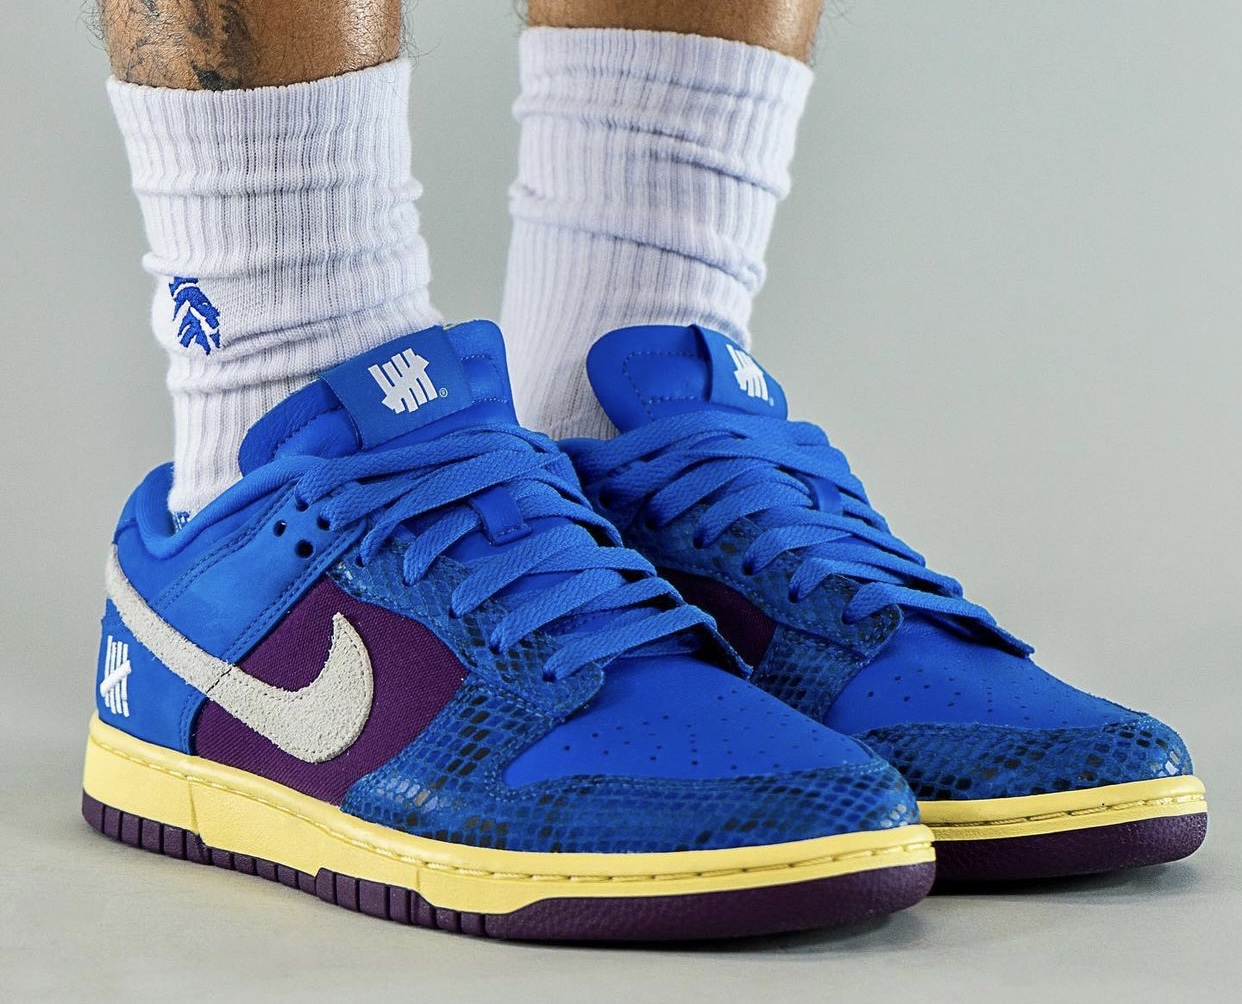 Undefeated Nike Dunk Low Royal Blue Purple DH6508-400 Release Date